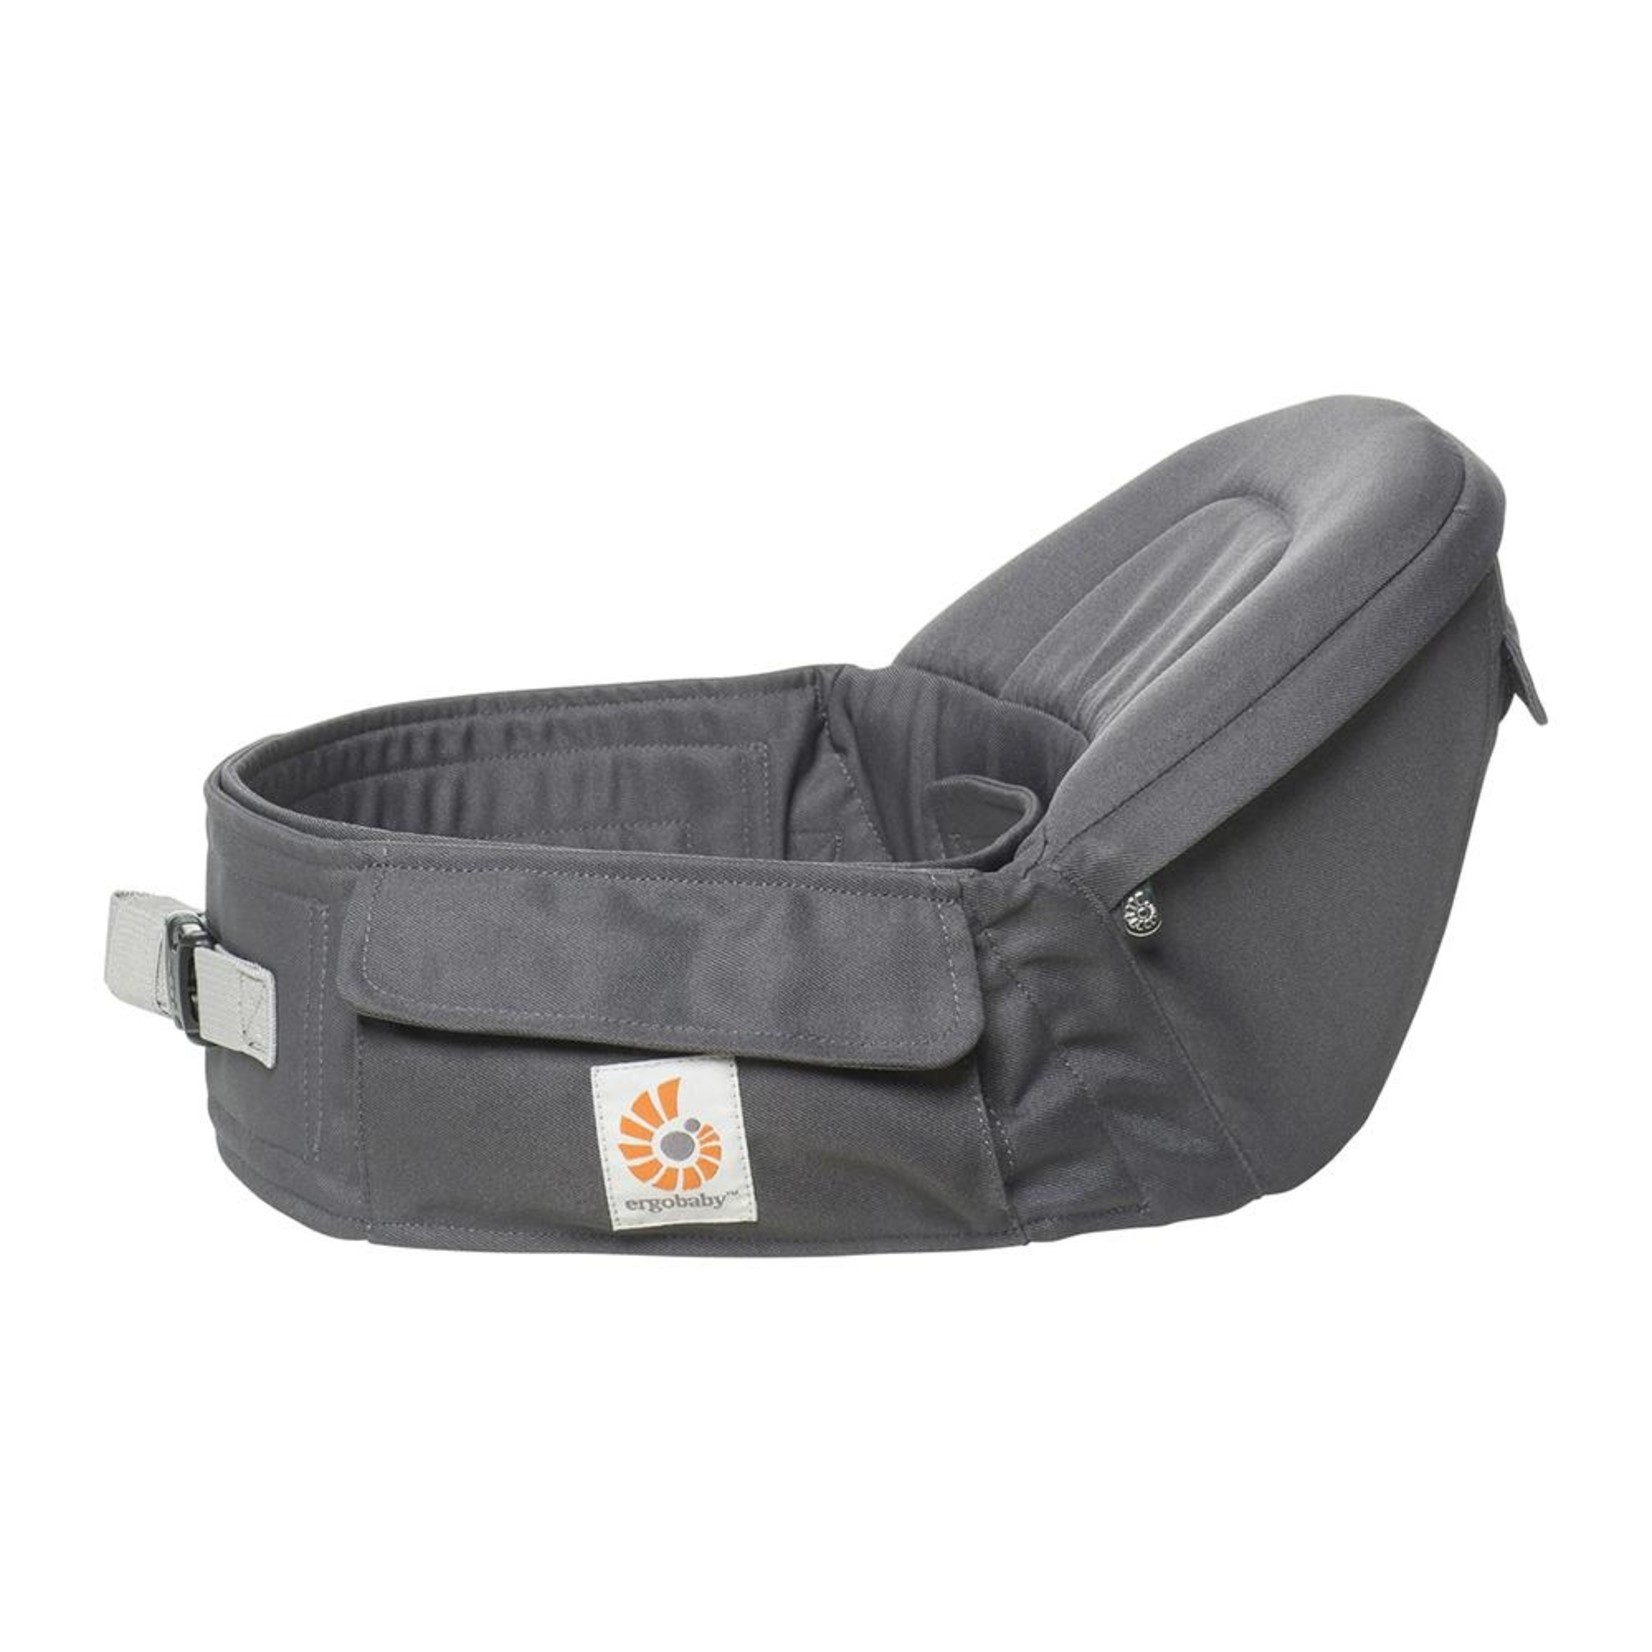 ERGOBABY HIP SEAT COOL AIR MESH BABY CARRIER - CARBON GREY